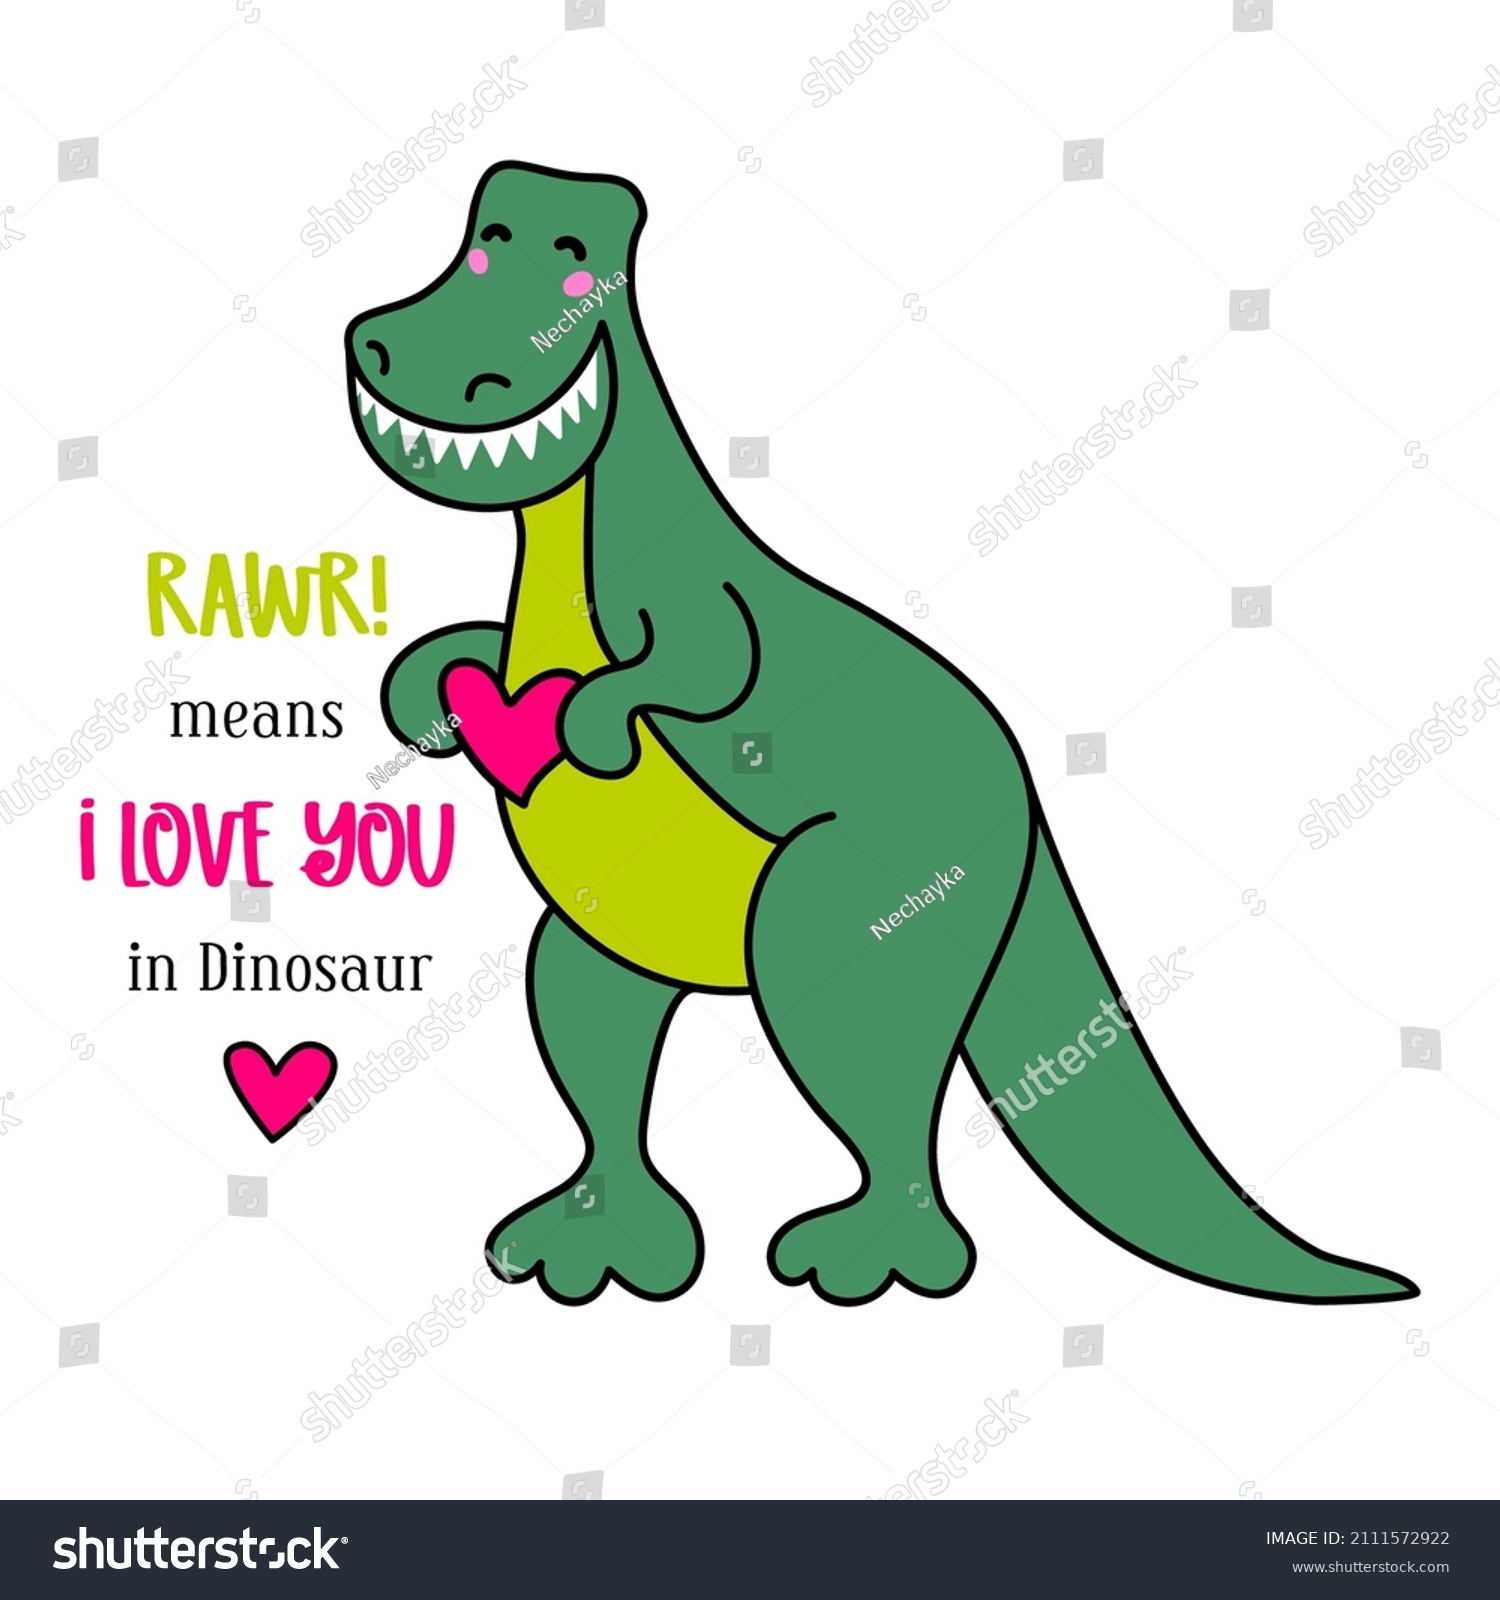 SVG of Funny Dinosaur for Valentines Day. Vector cartoon drawing isolated. Rawr means I love you in Dinosaur. svg